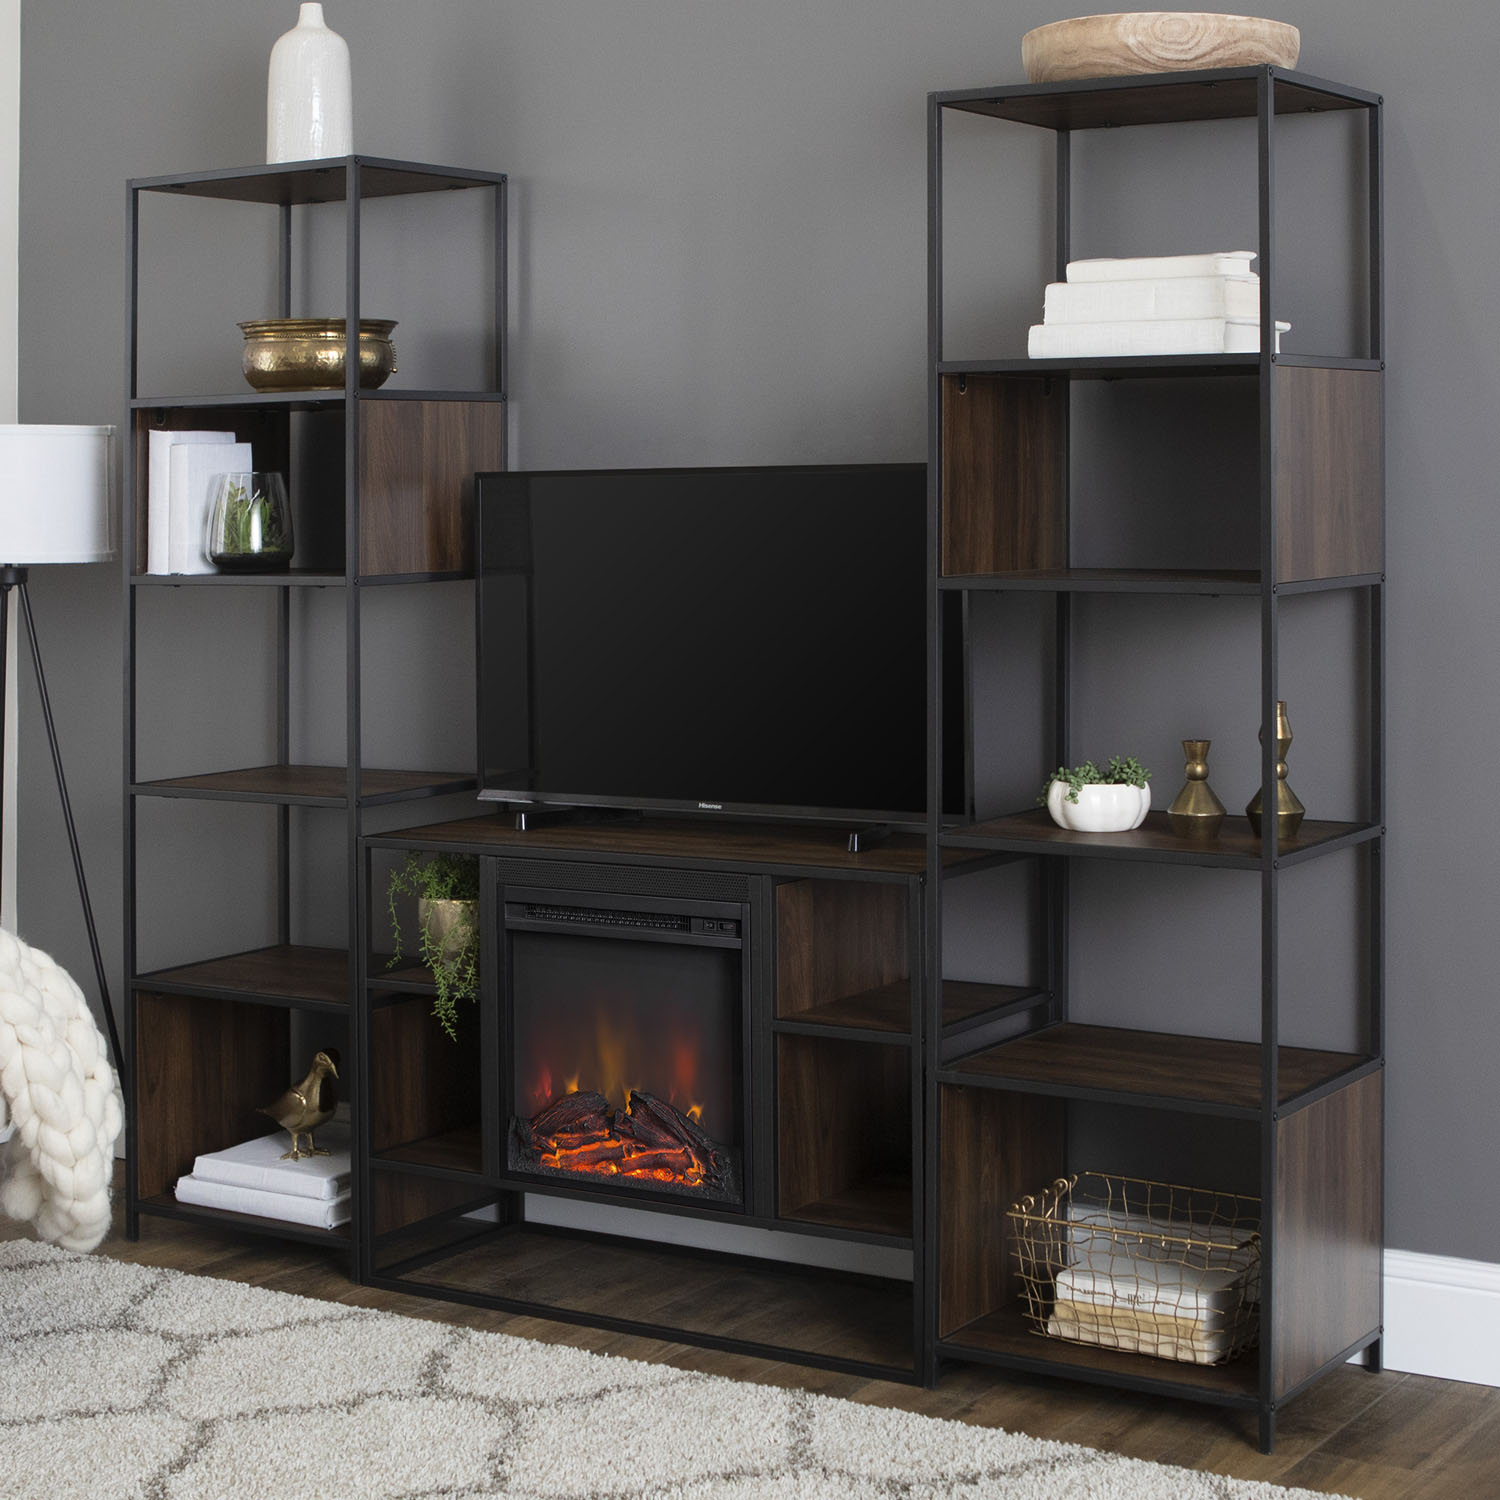 60 Inch Corner Tv Stand with Fireplace Best Of Tv Stands